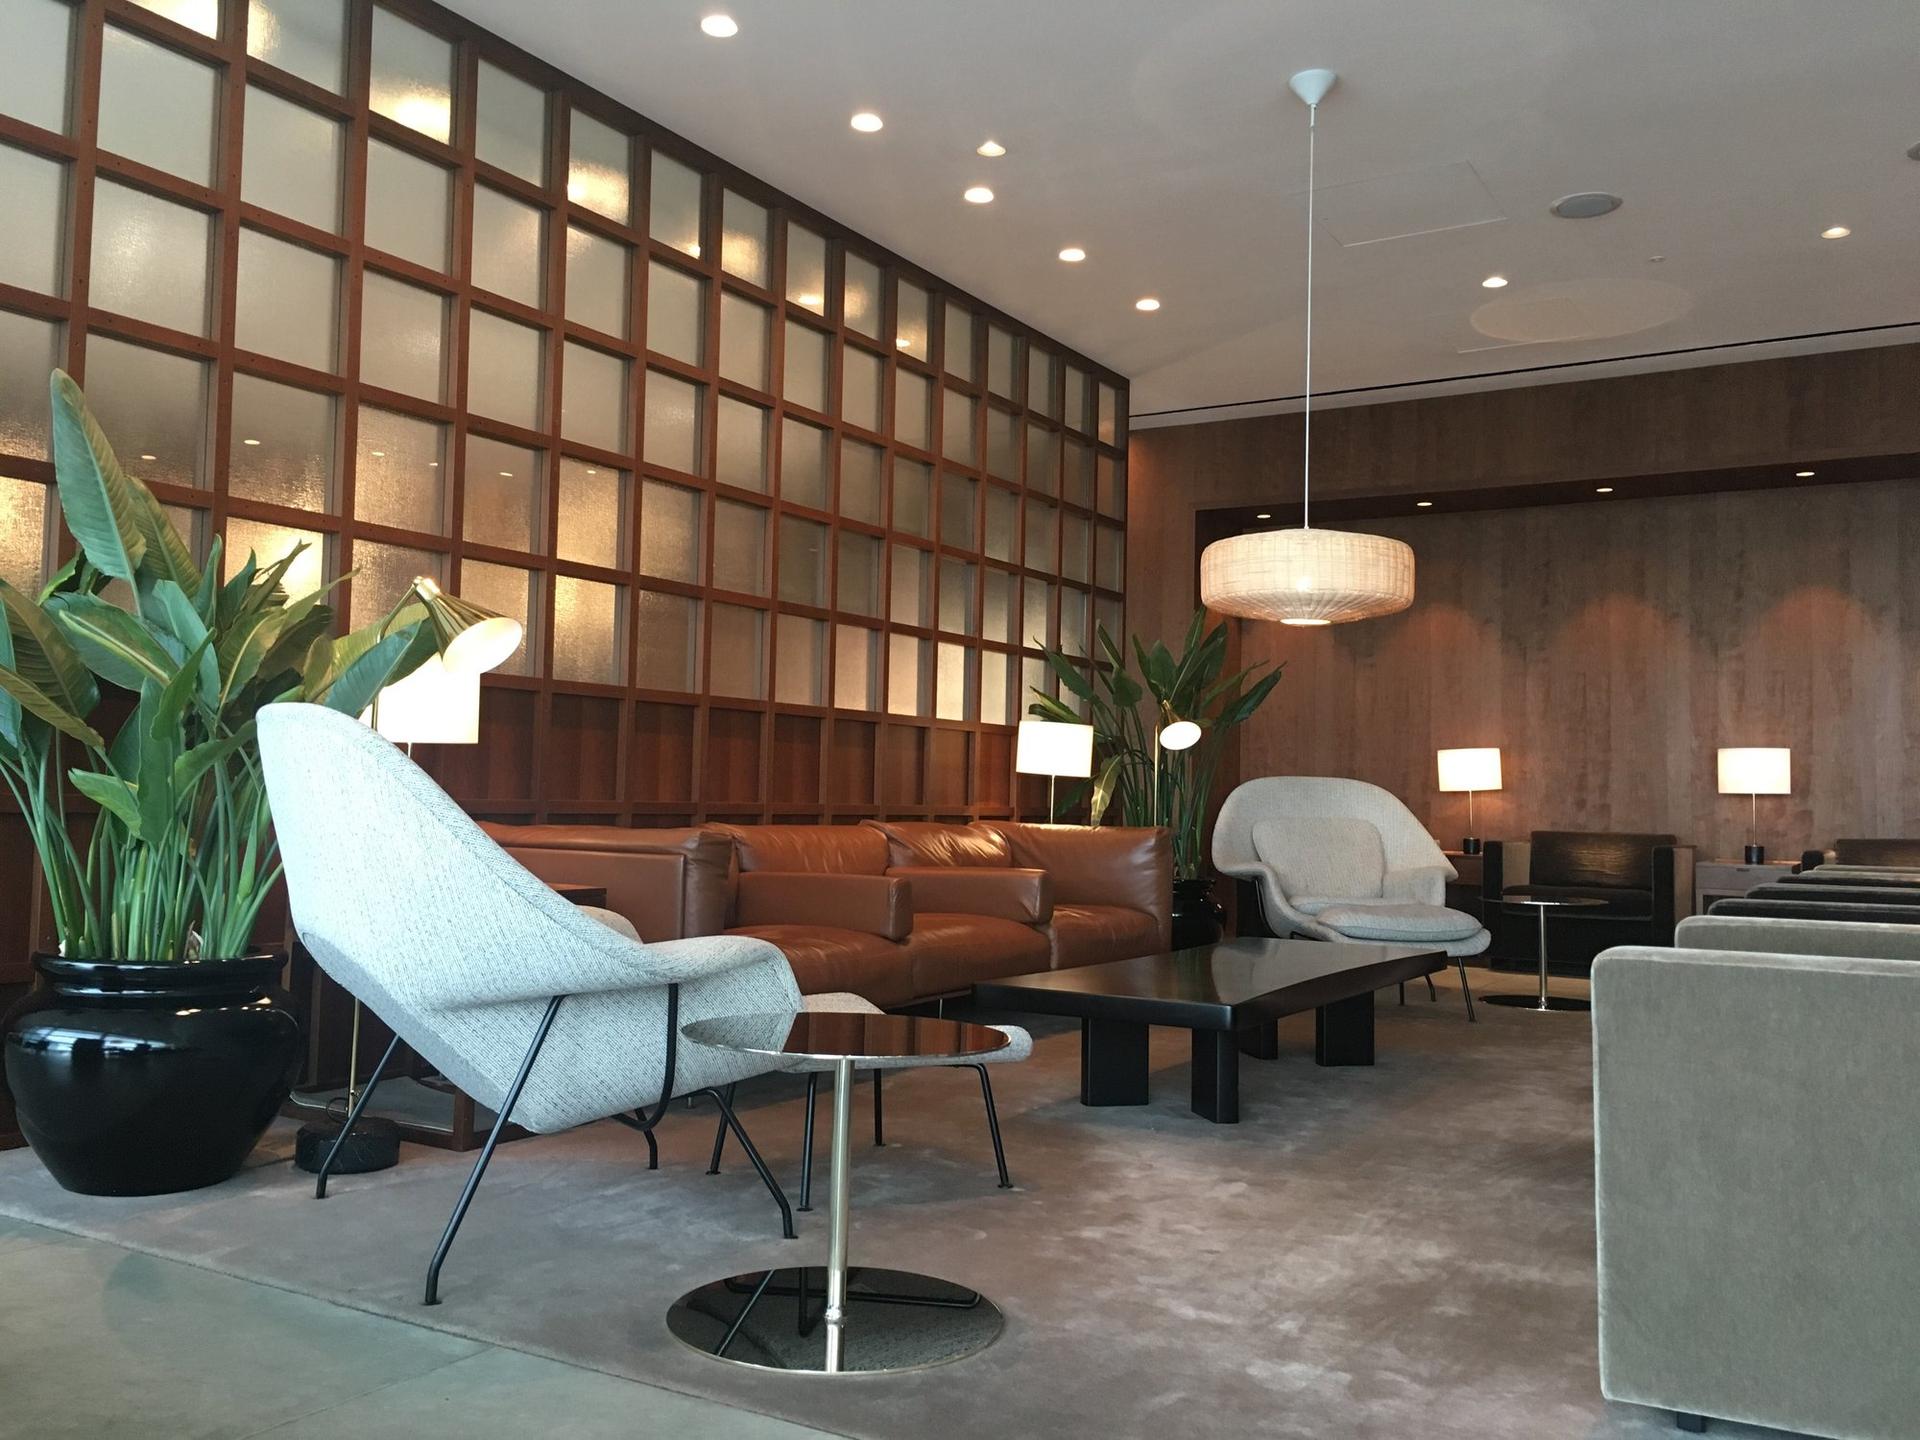 Cathay Pacific Business Class Lounge image 26 of 48